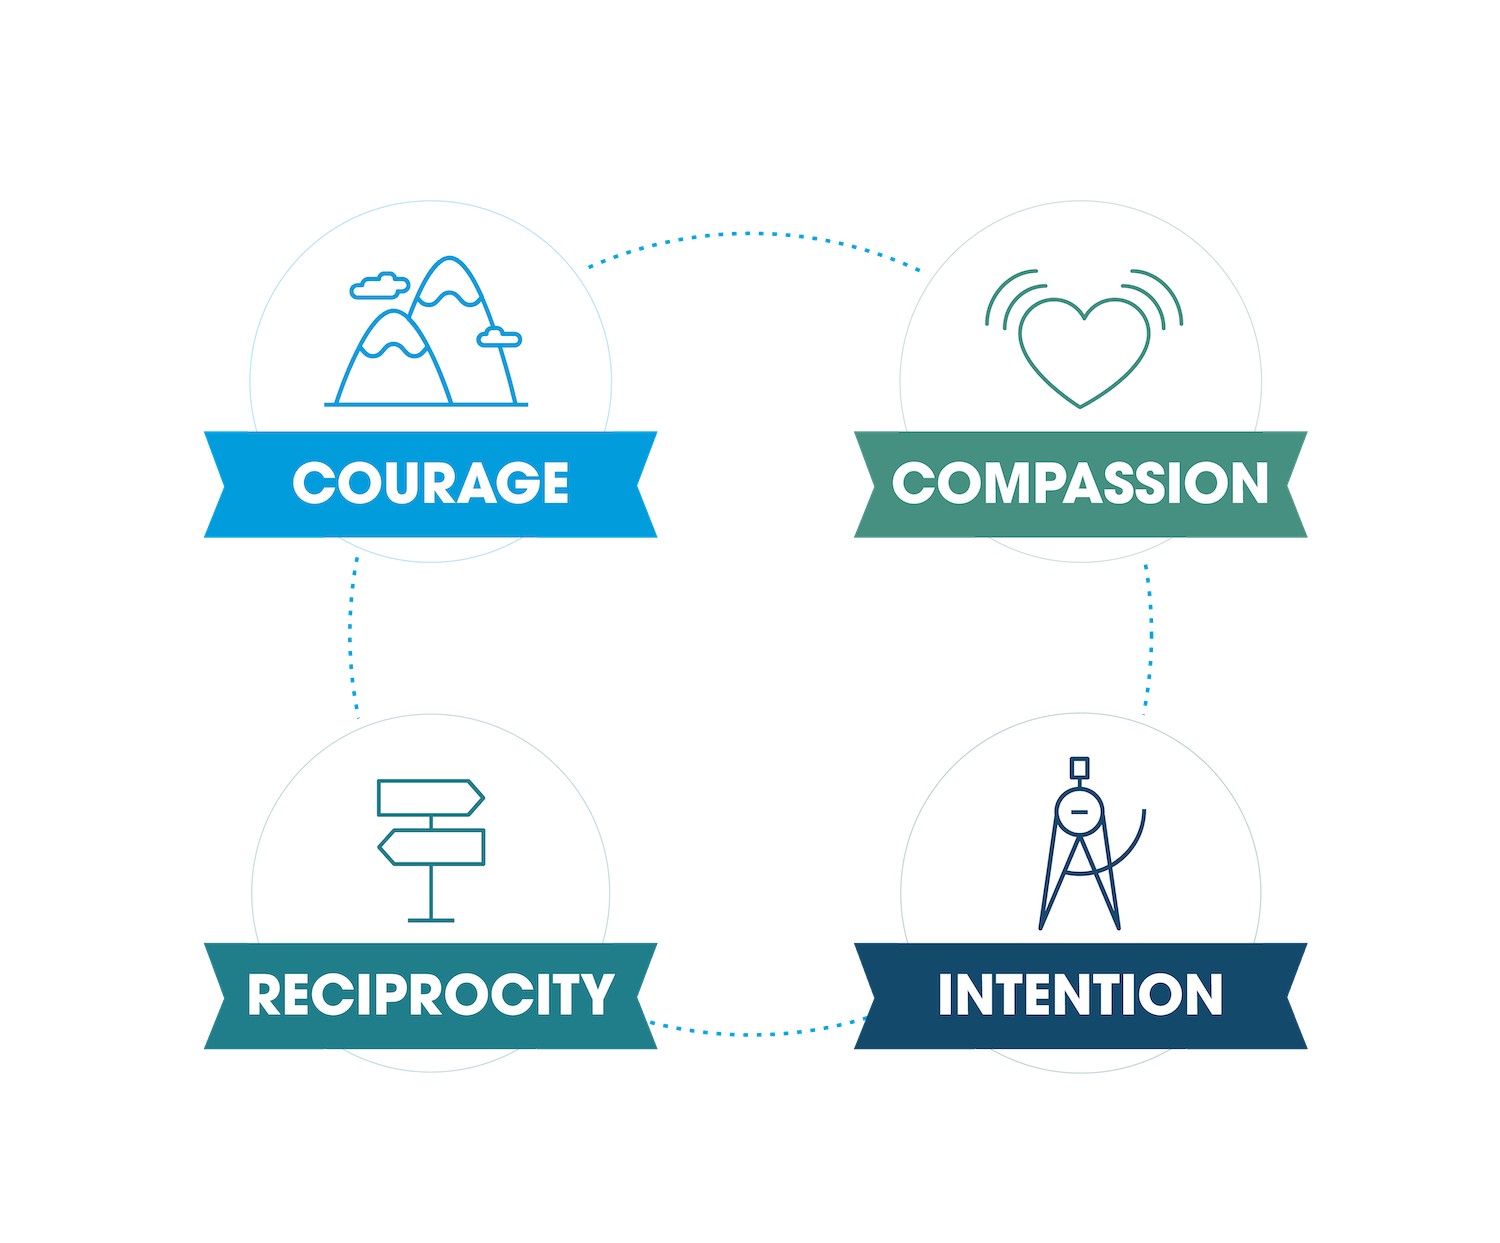 A graphic showing four linked relationship design mindsets: Compassion, Intention, Courage, and Reciprocity.